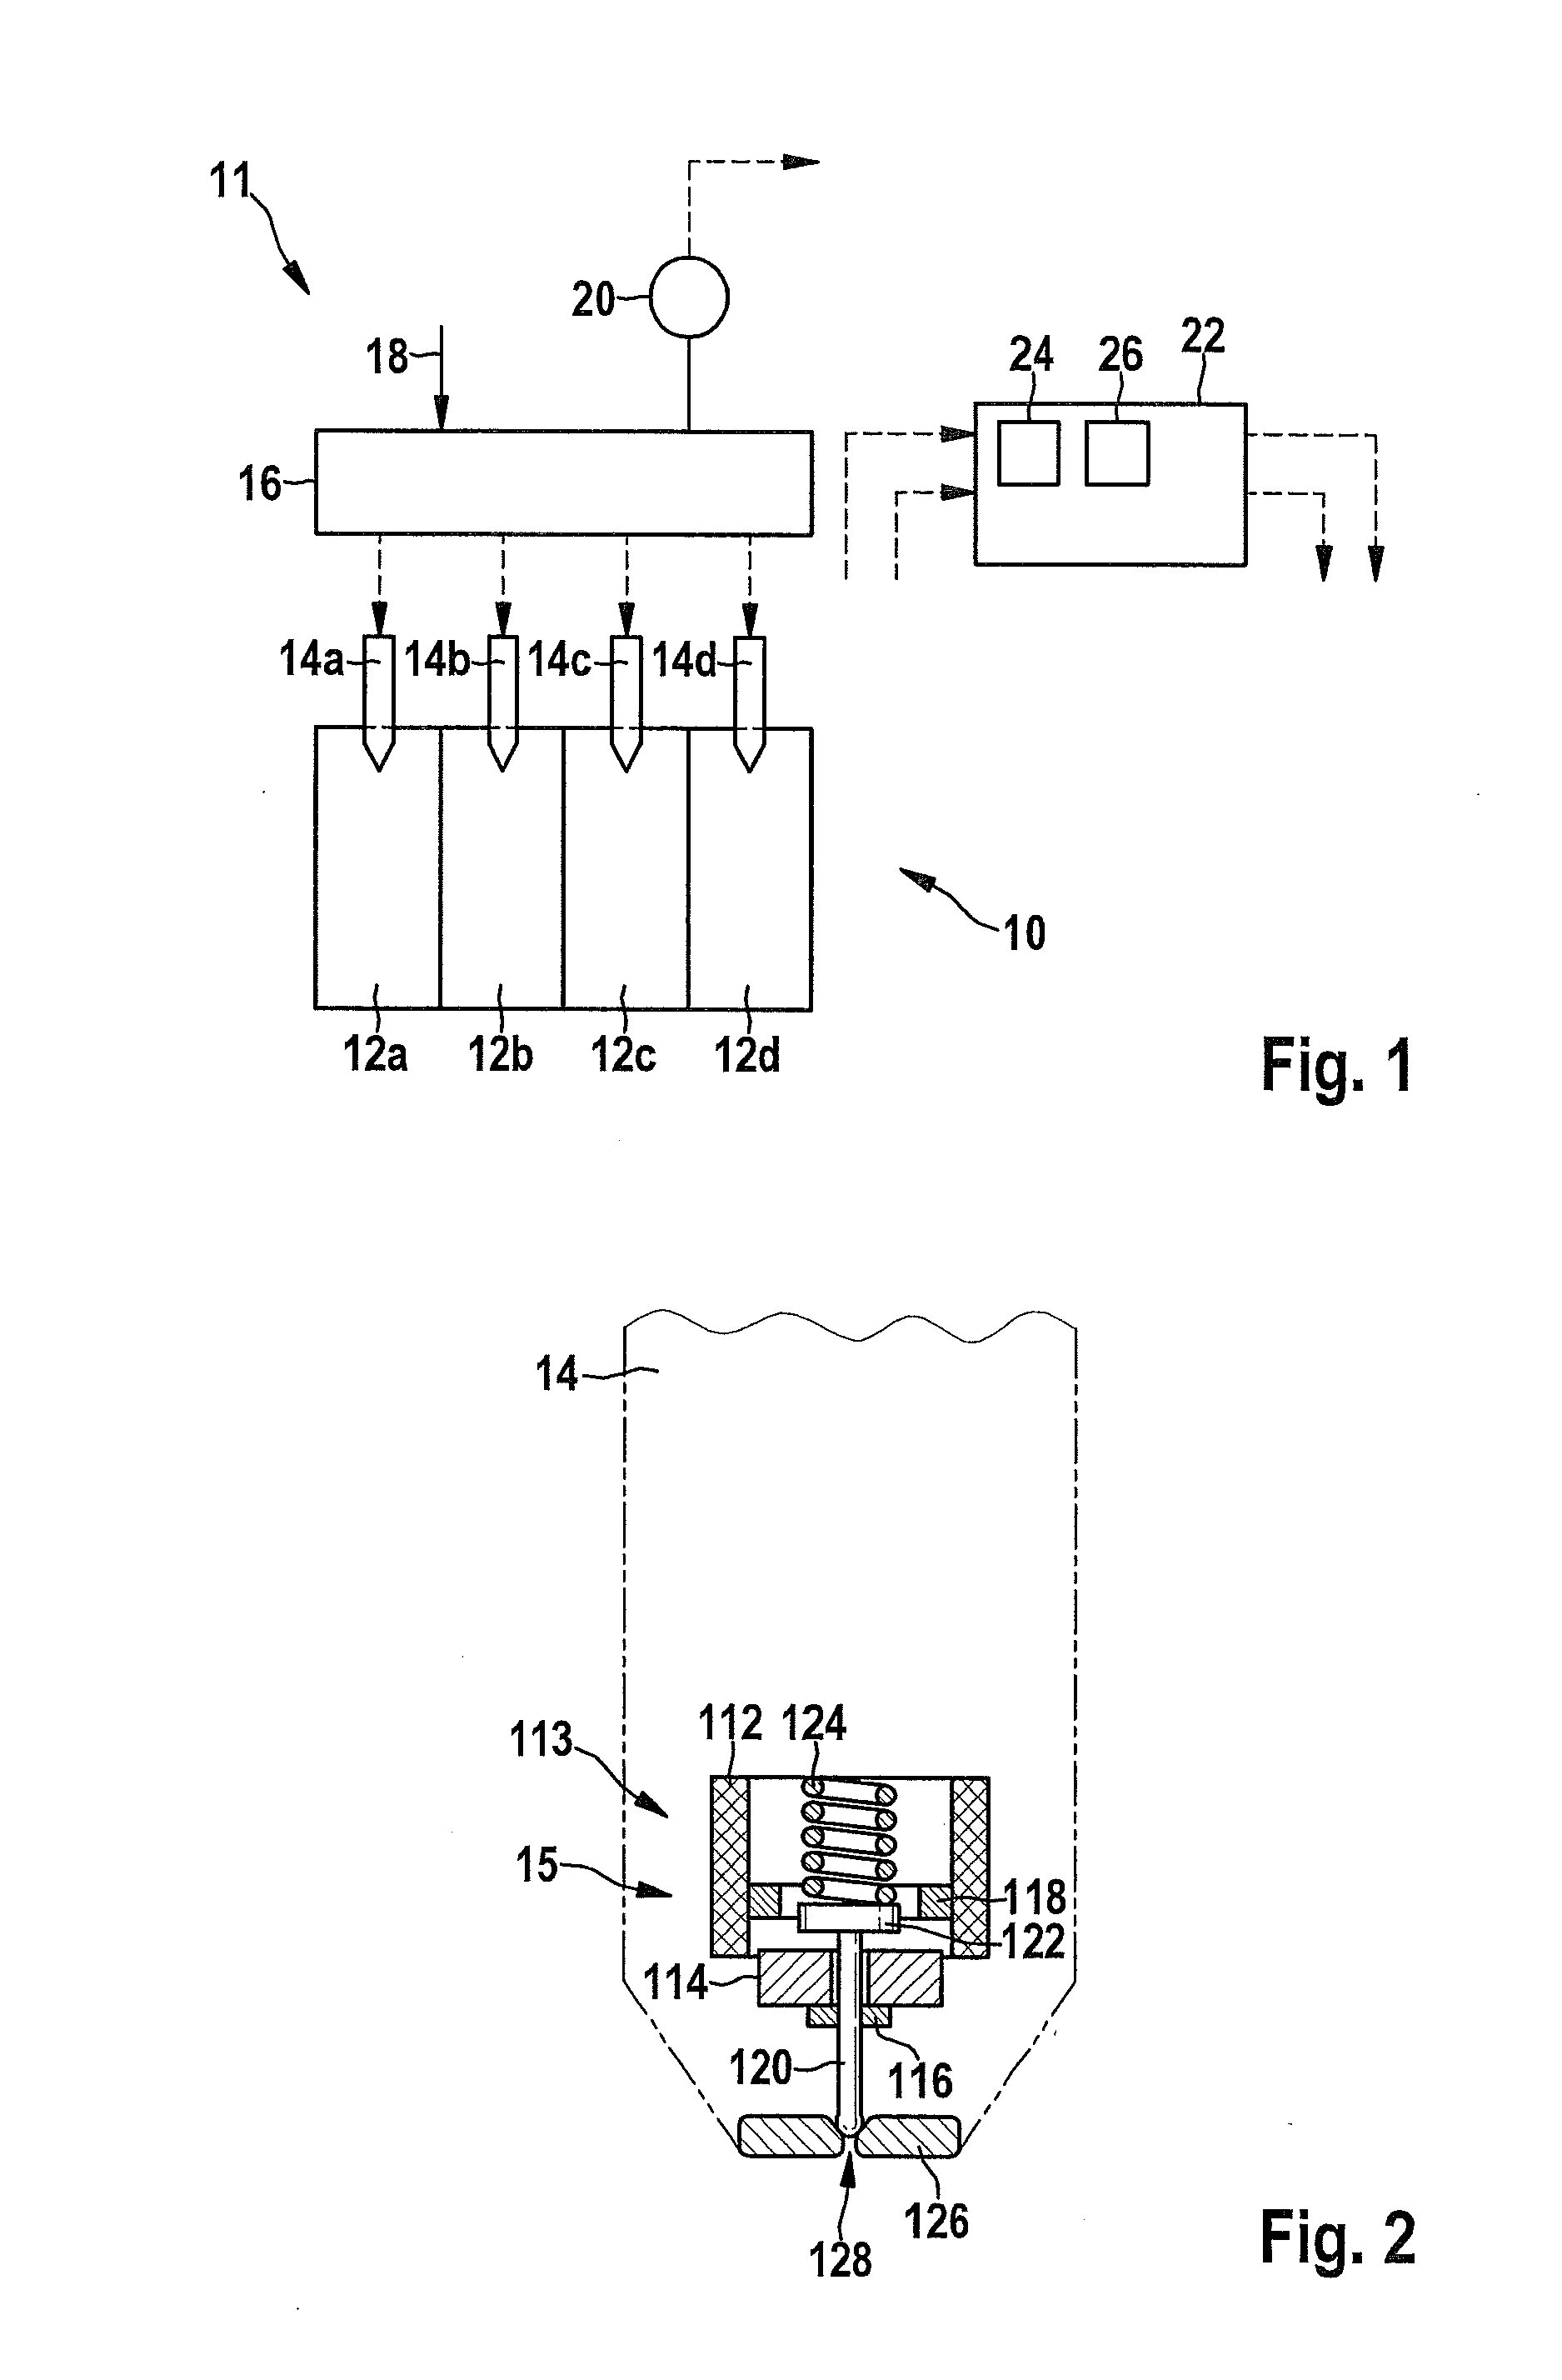 Method for detecting an error in the opening behavior of an injector